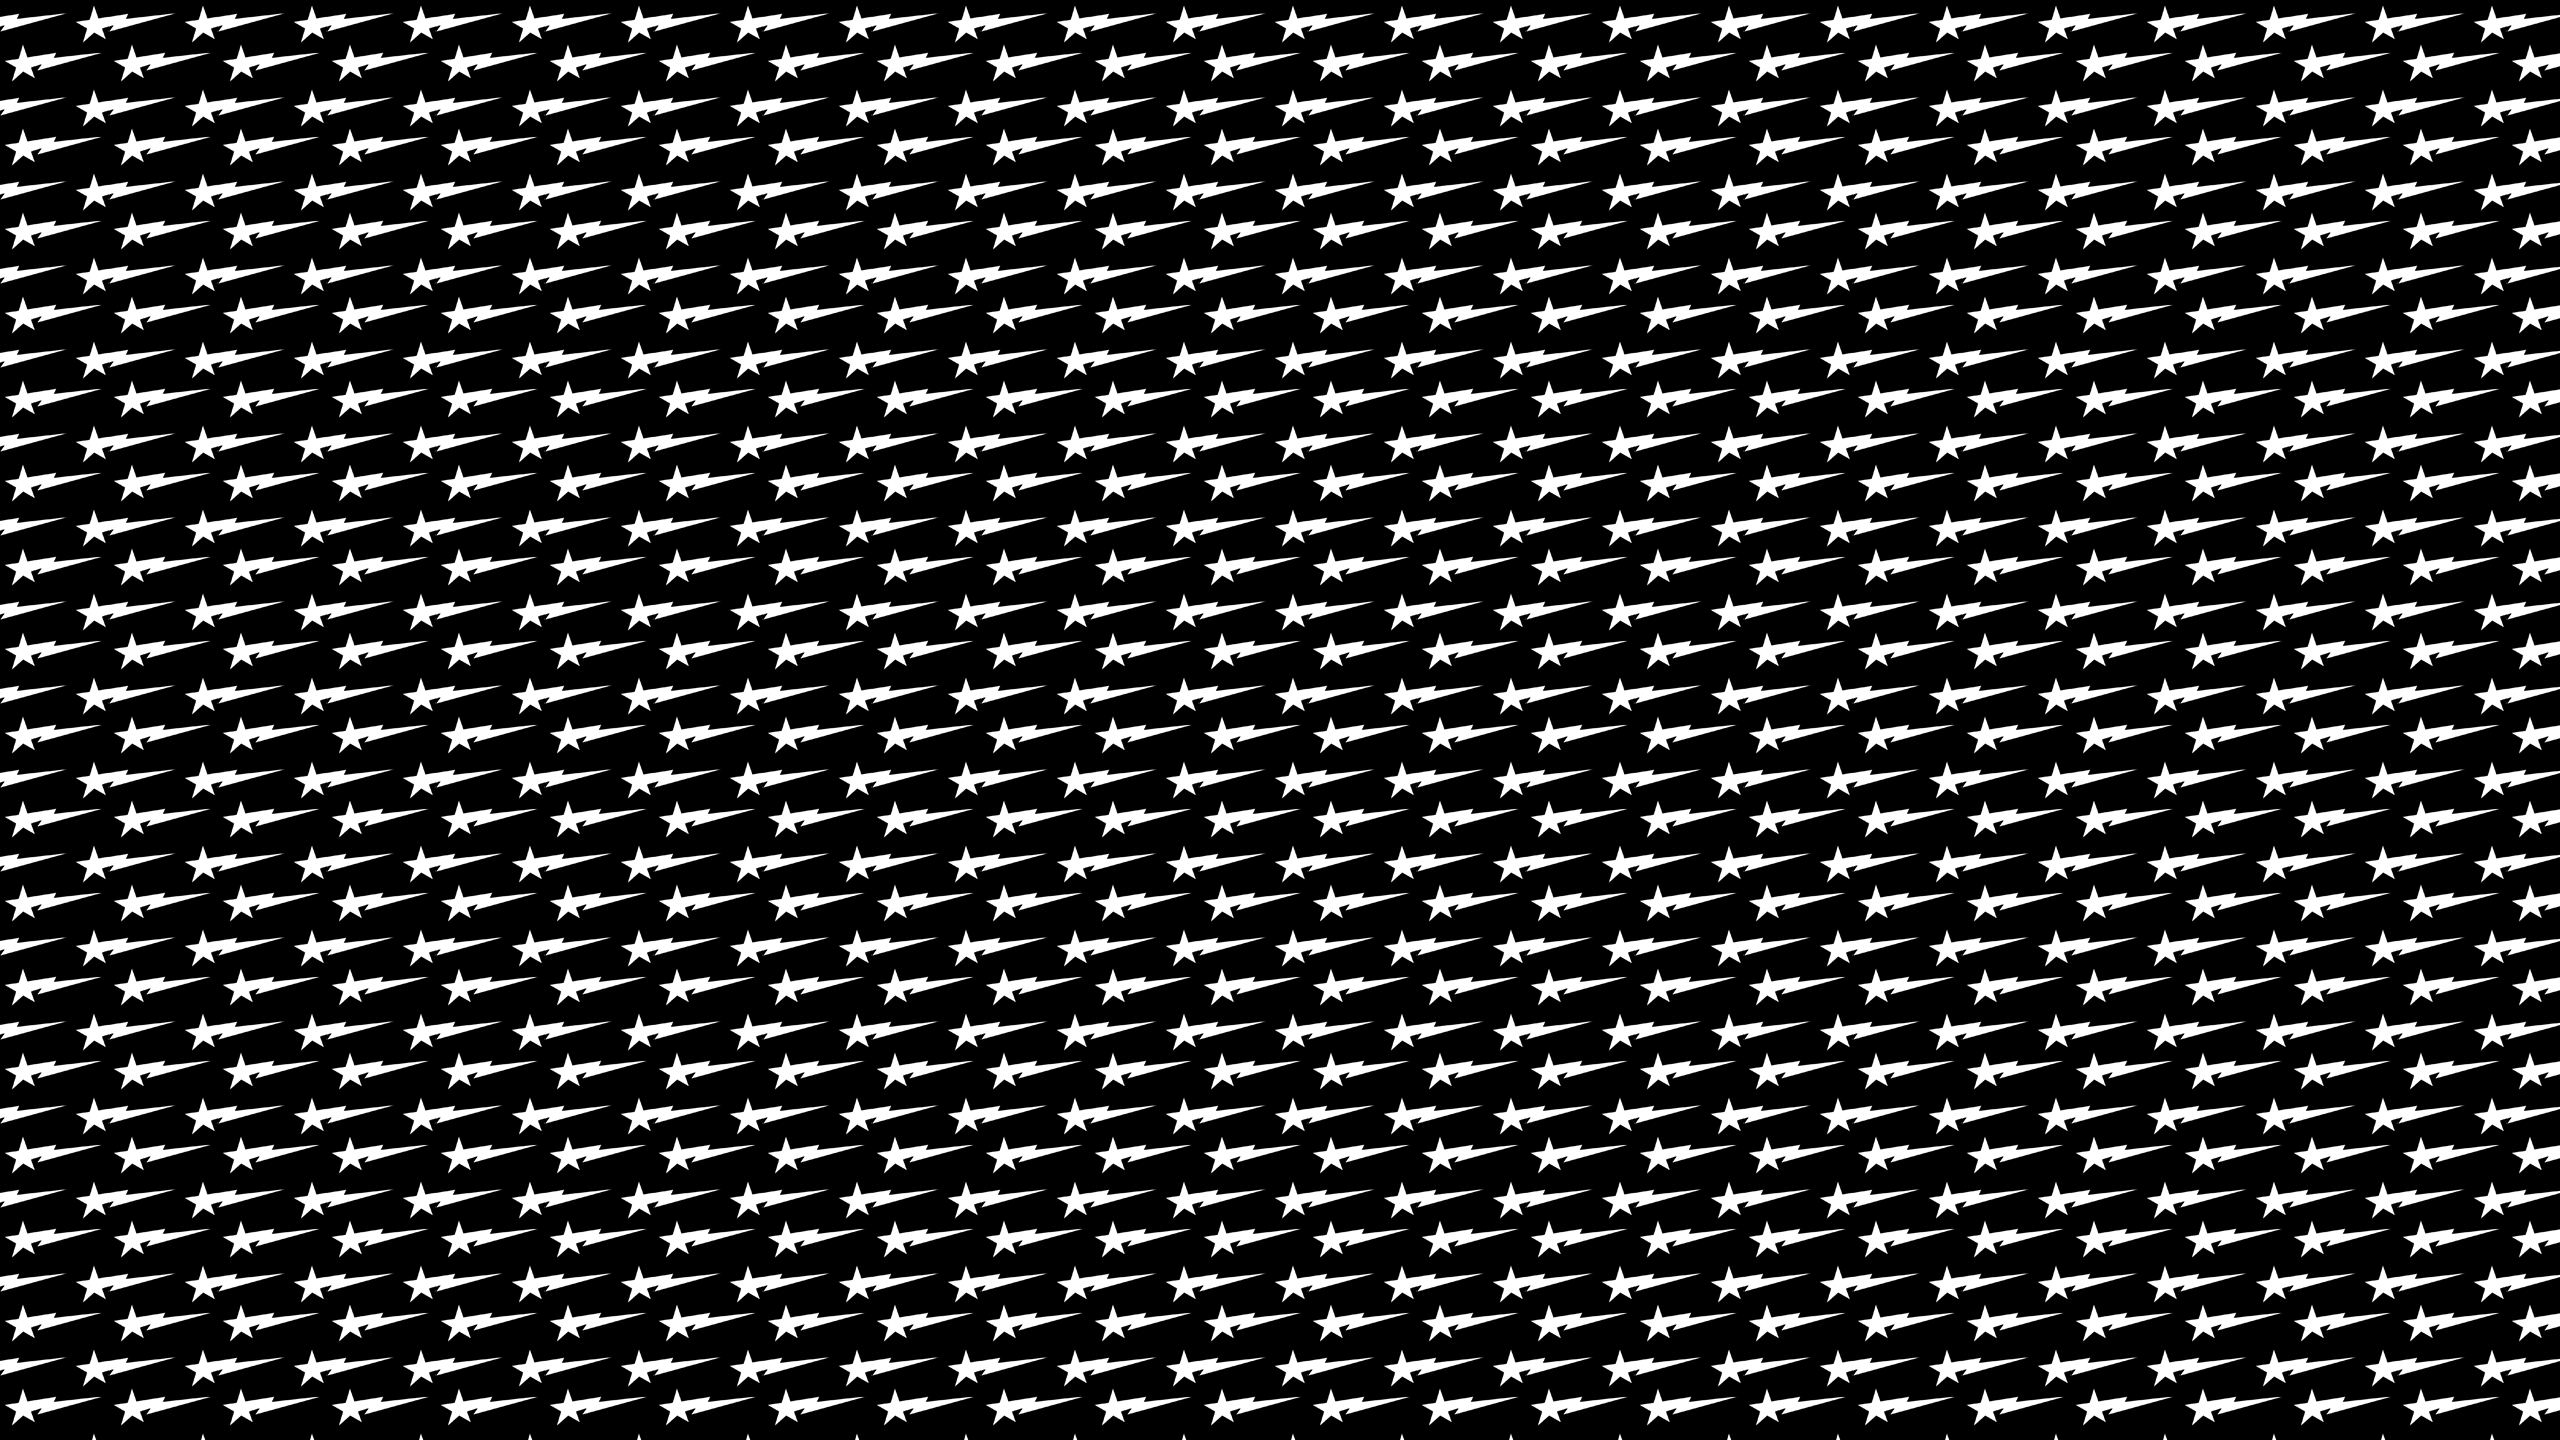 A Bathing Ape Wallpapers - Wallpaper Cave